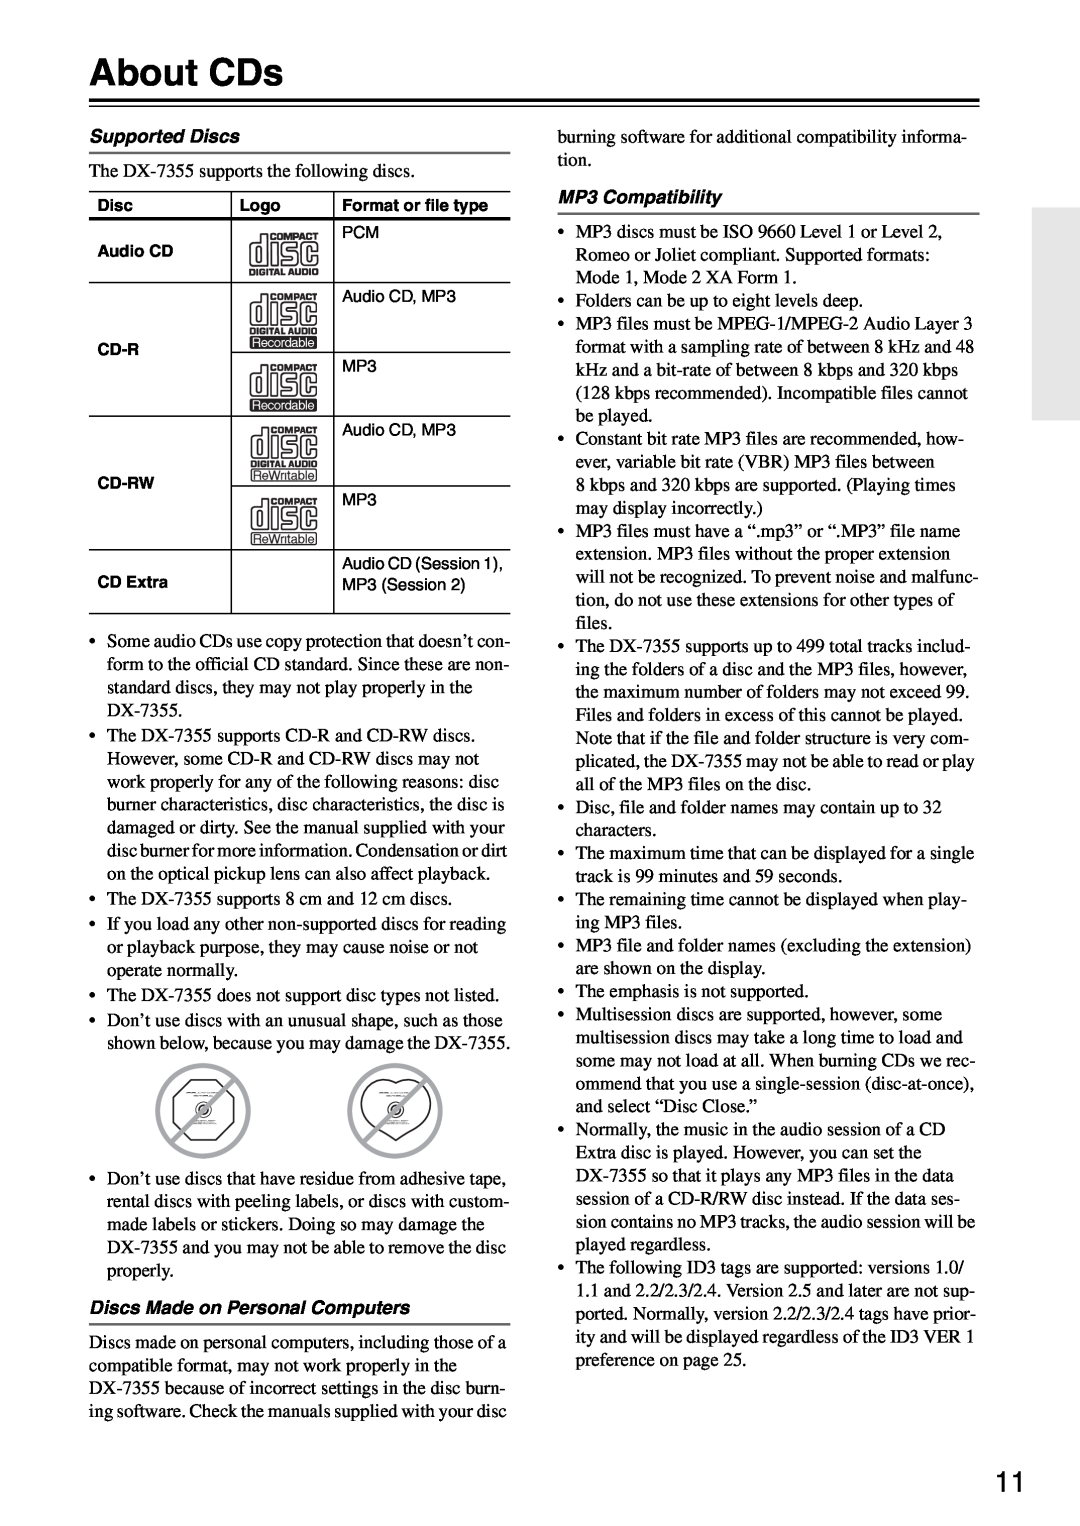 Onkyo DX-7355 instruction manual About CDs, Supported Discs, Discs Made on Personal Computers, MP3 Compatibility 